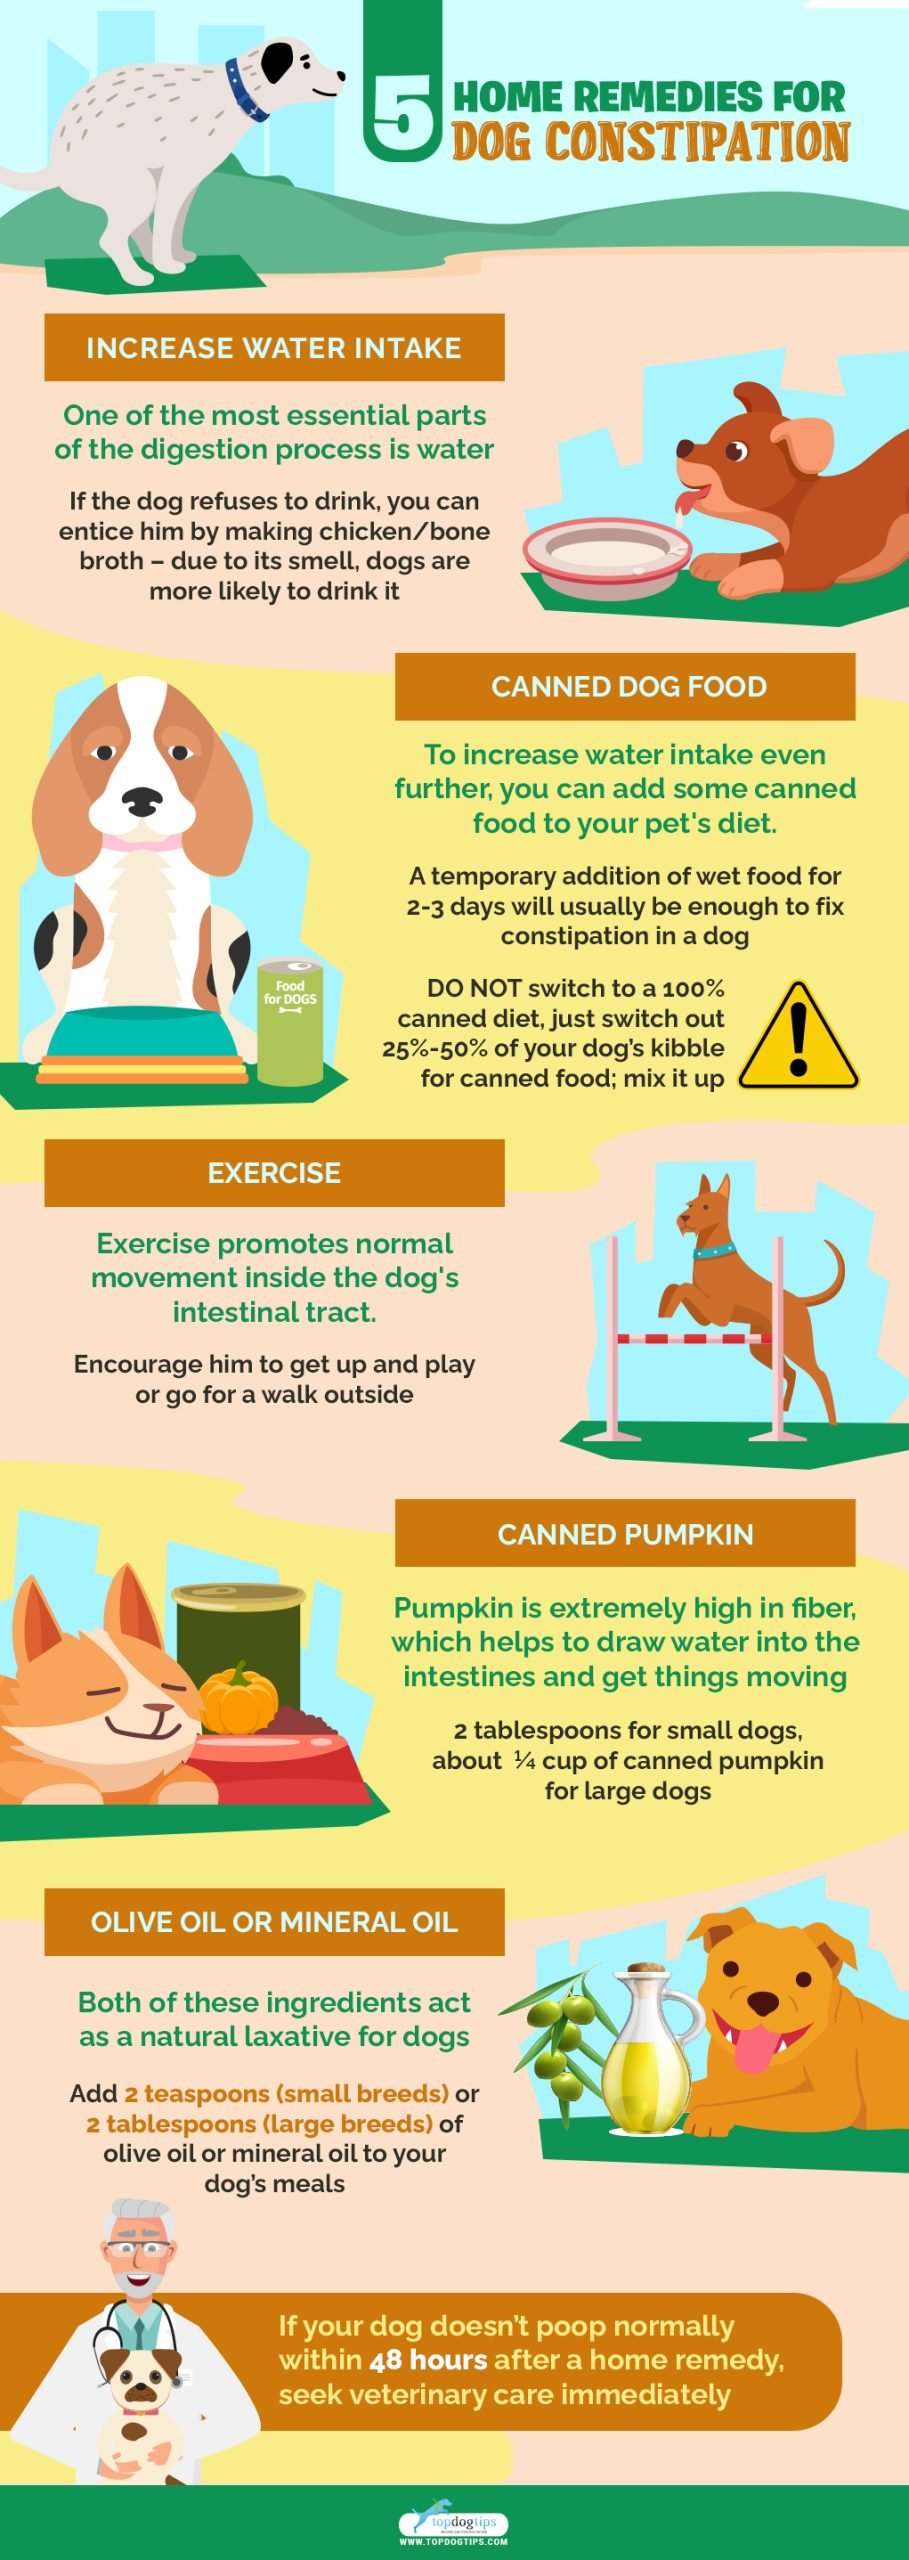 Home Remedies for Dog Constipation 